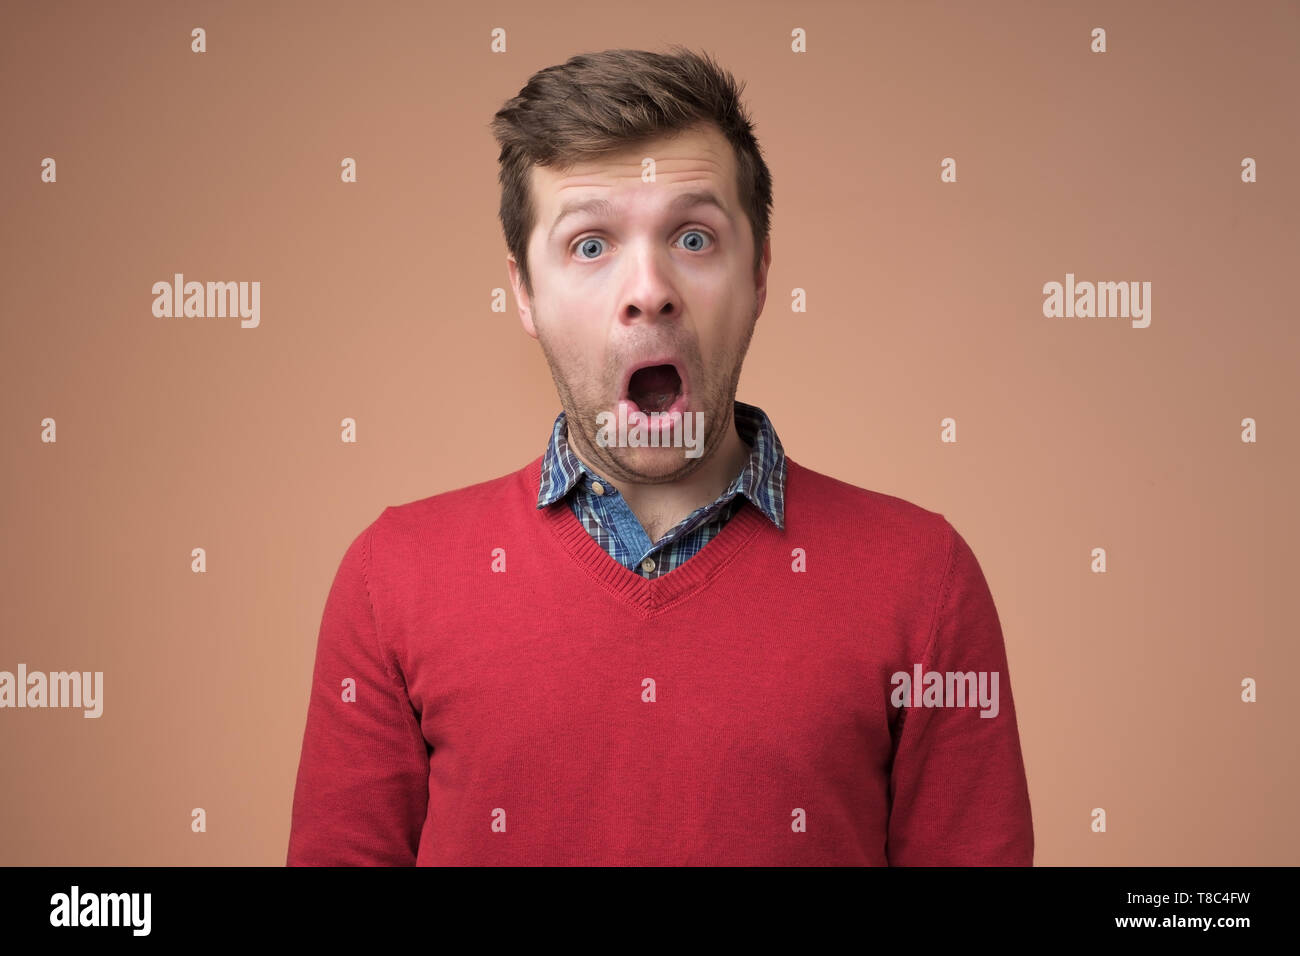 Shocked face of caucasian man in red sweater. Stock Photo